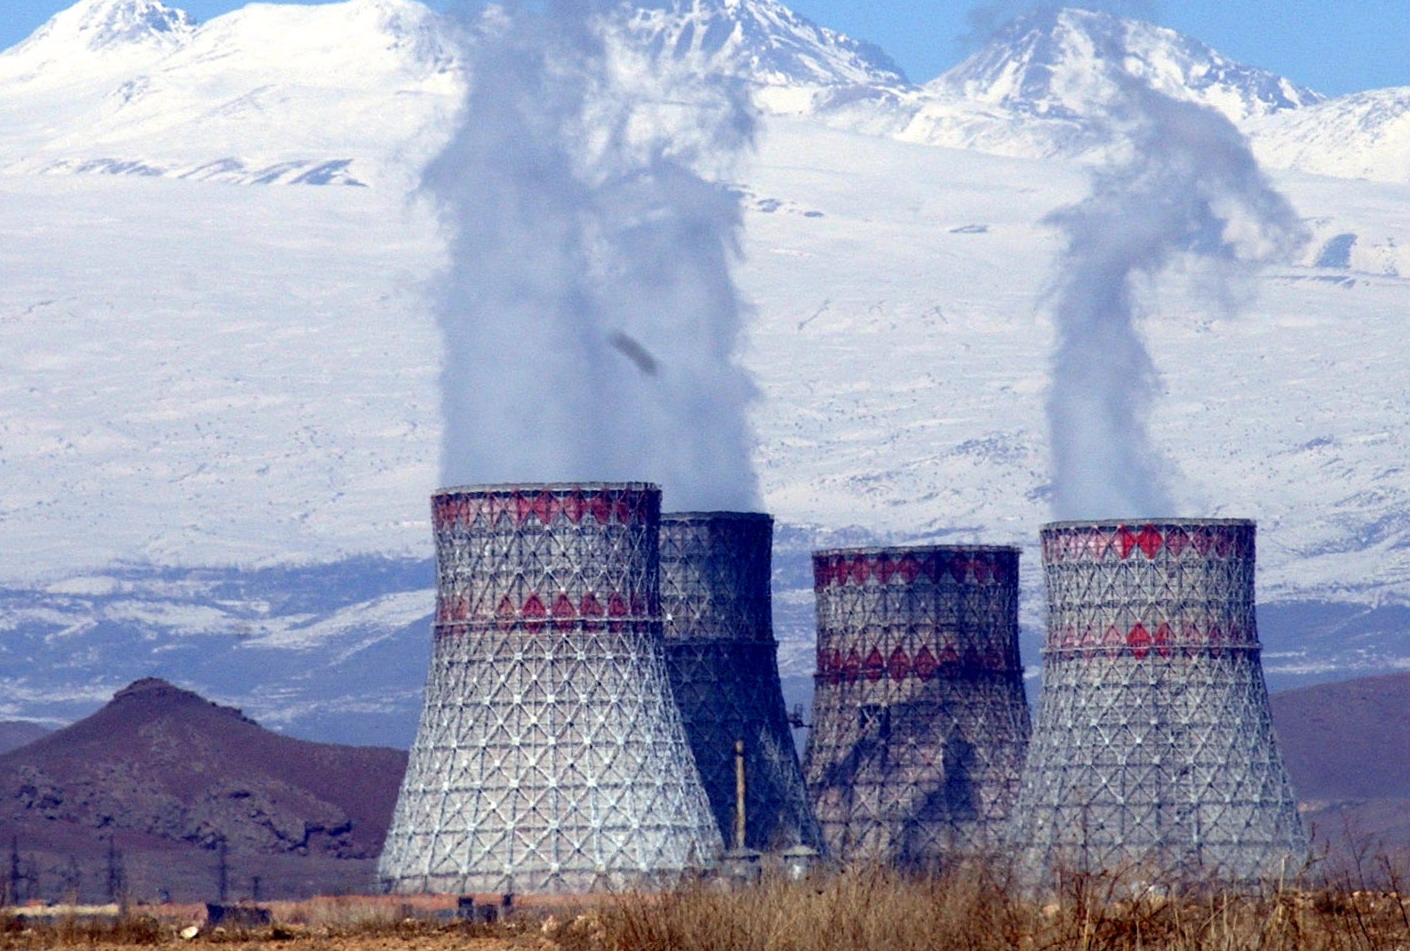 The age, risk and closure consequences of the Metsamor NPP